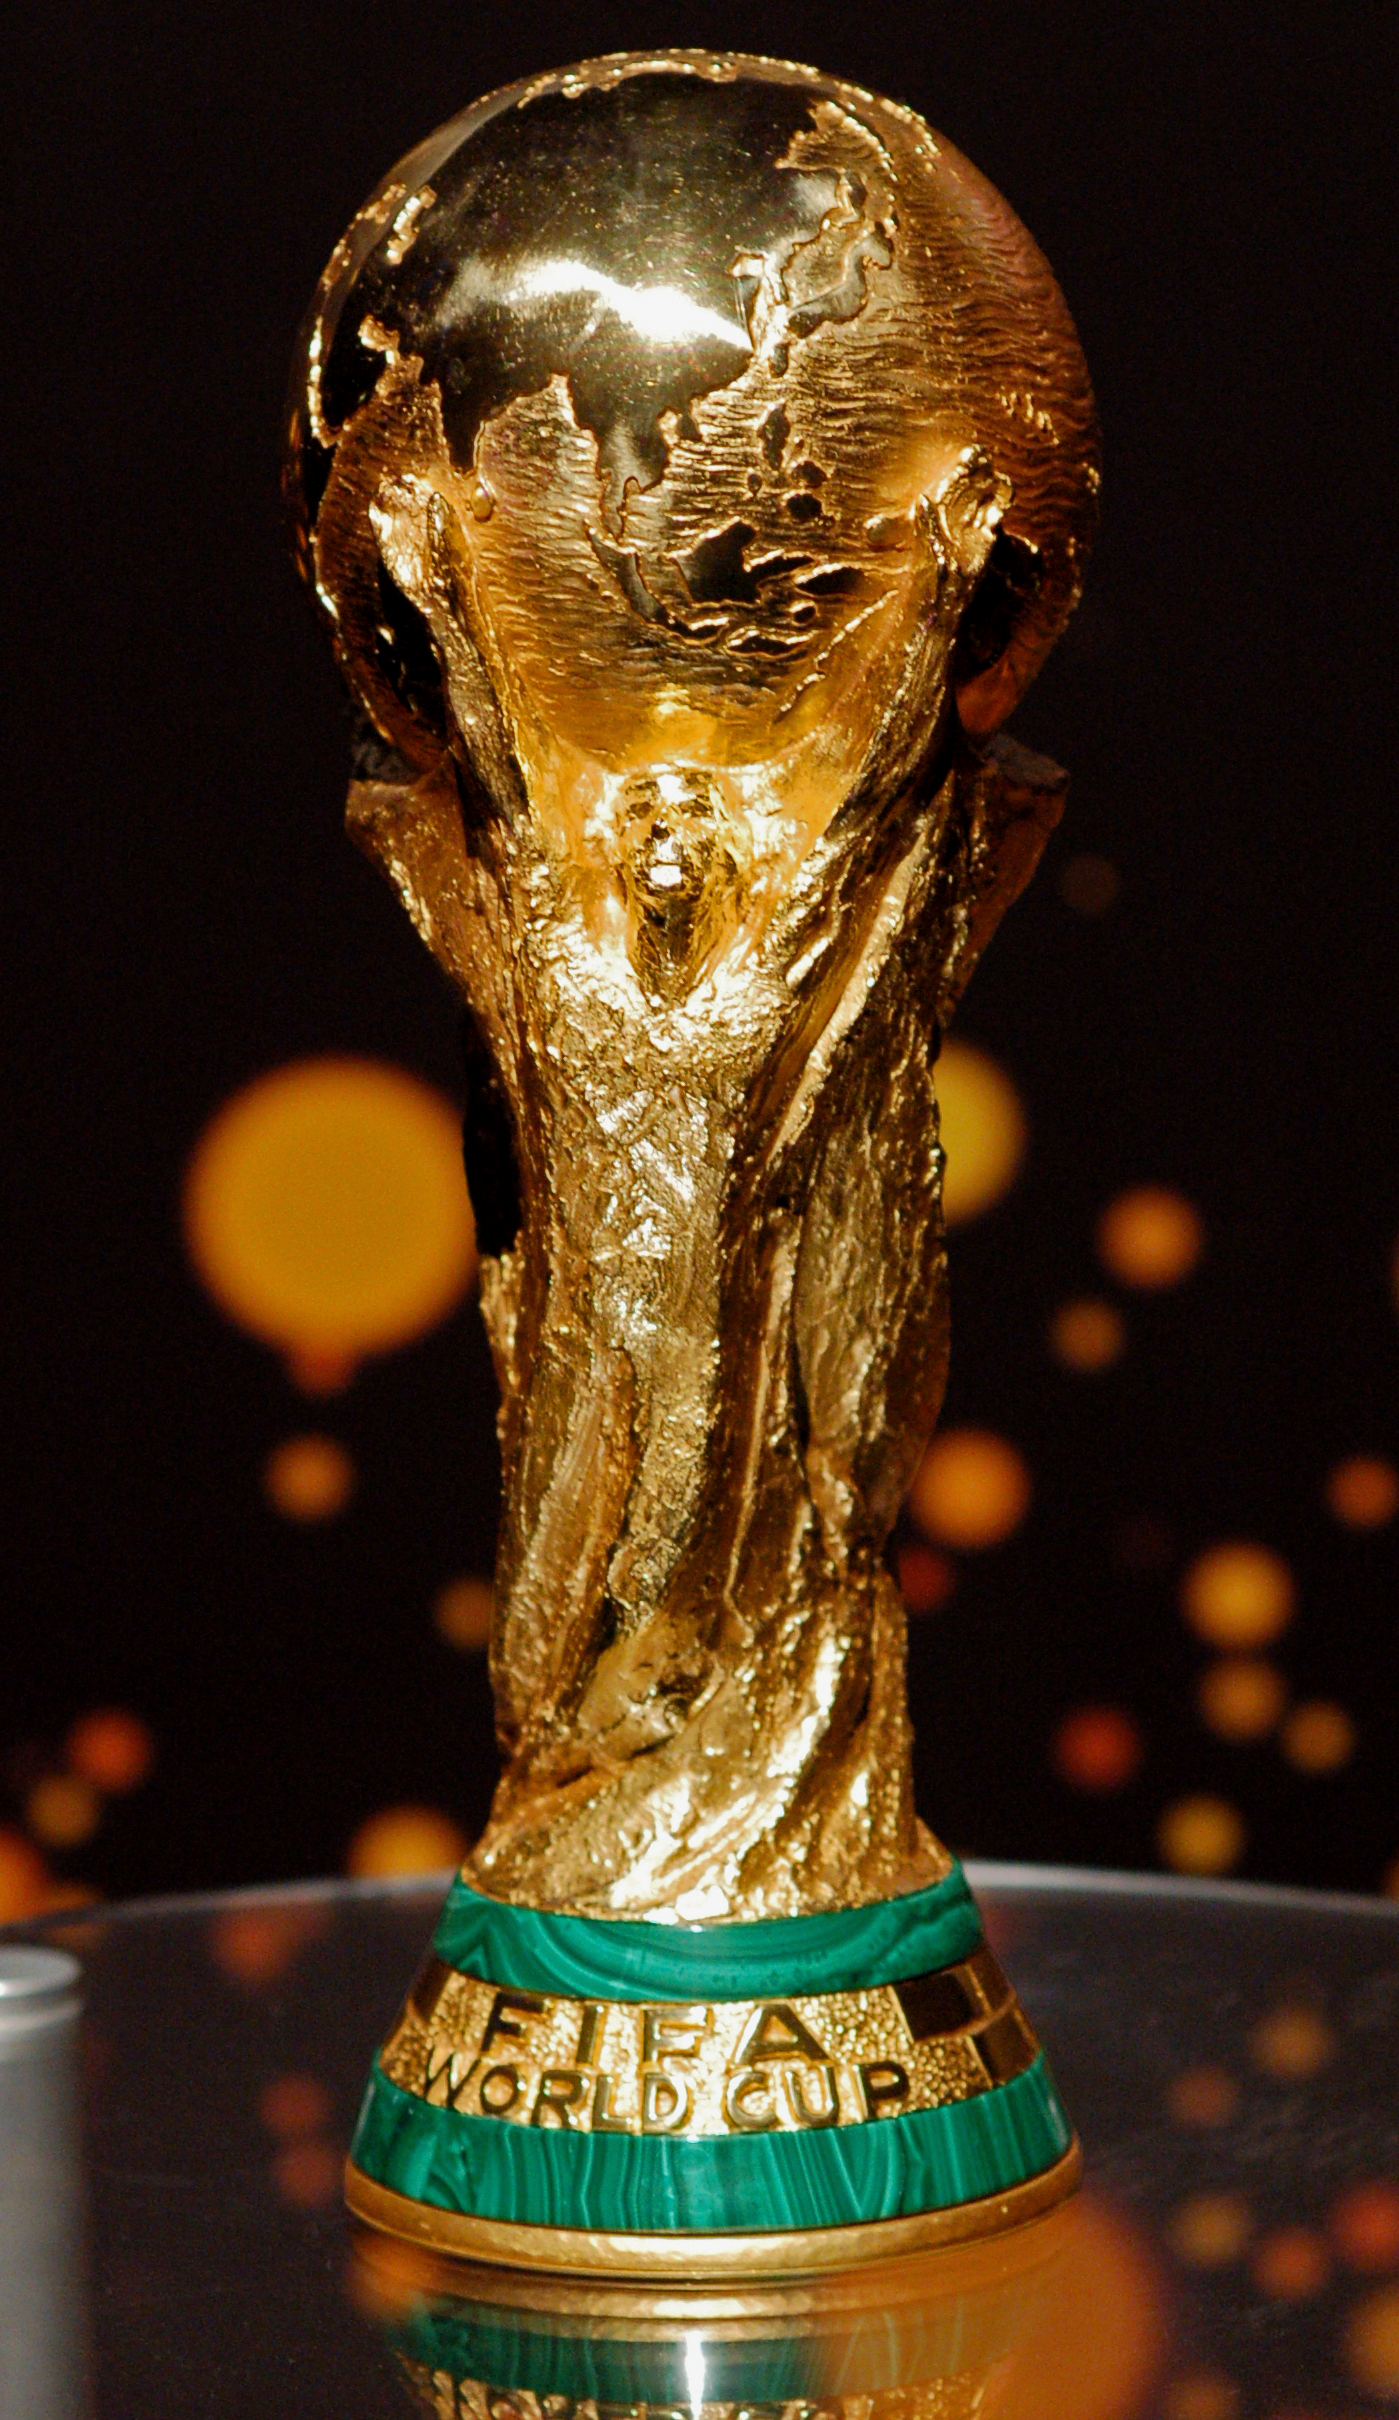 Fifa World Cup png images